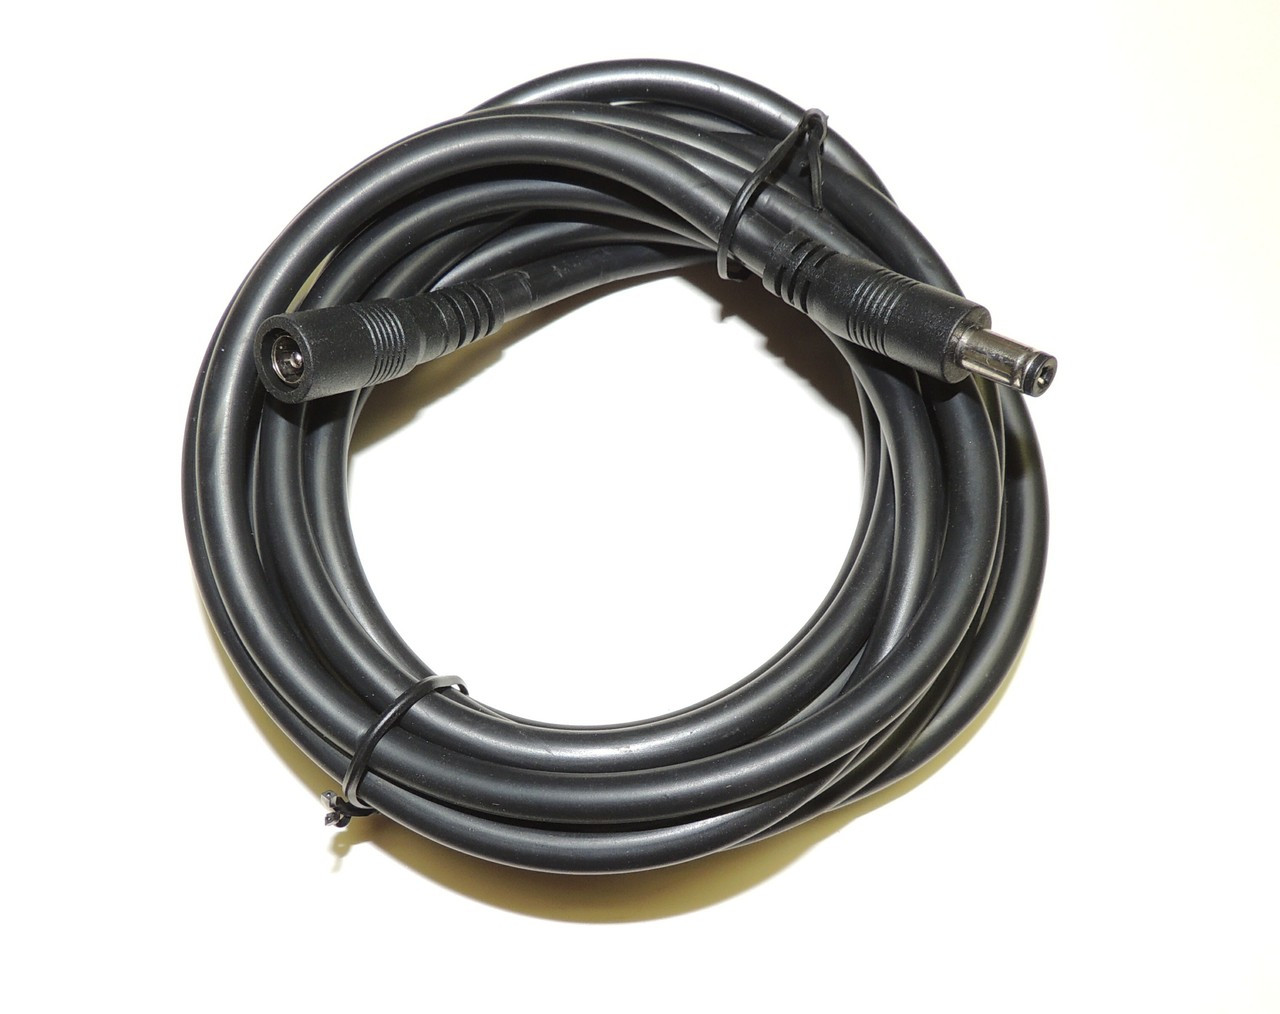 Power Extension Cable, DC 2.1 mm x 5.5 mm, 16 GA, 10 ft. 